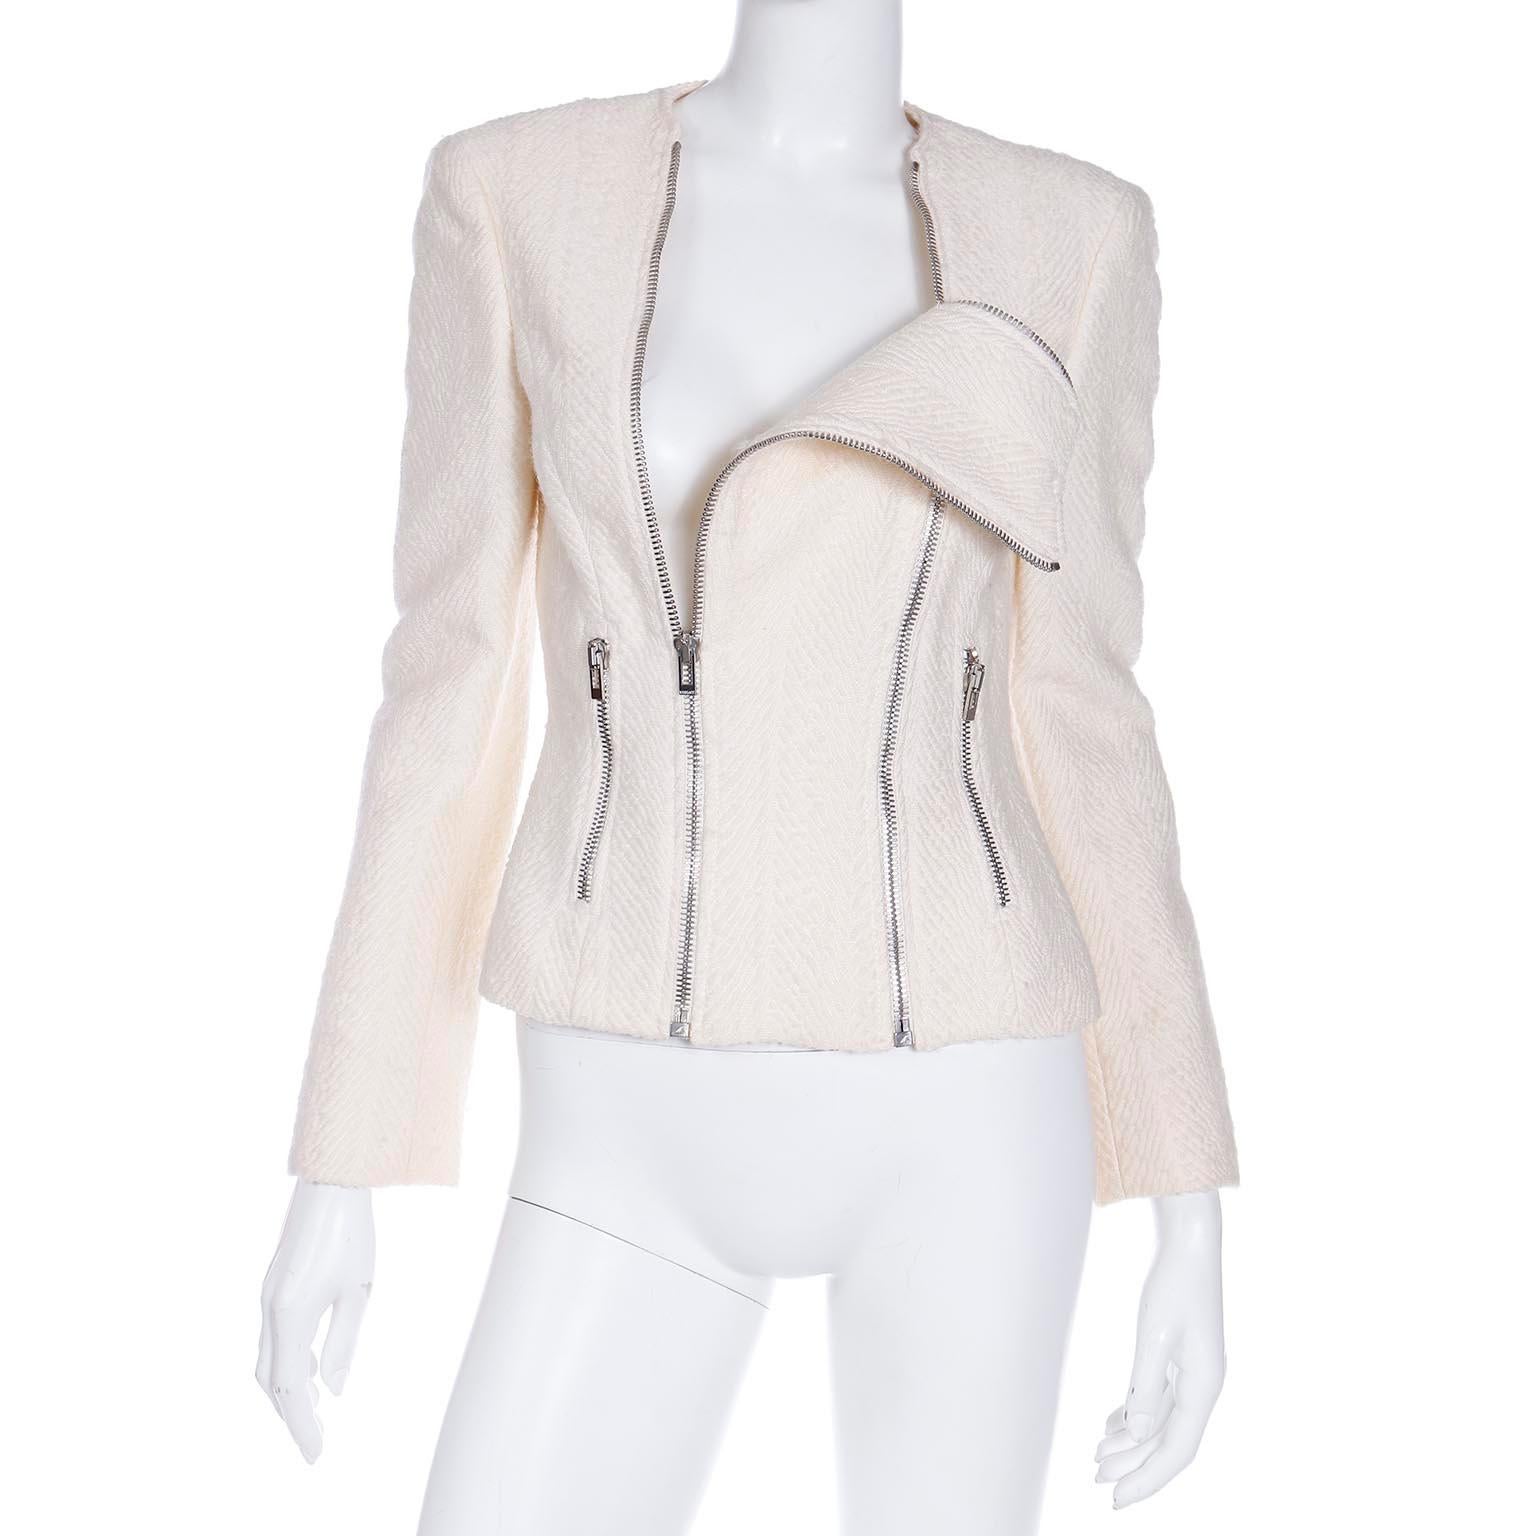 Early 2000s Gianni Versace Ivory Boucle Wool Double Zip Front Jacket For Sale 1